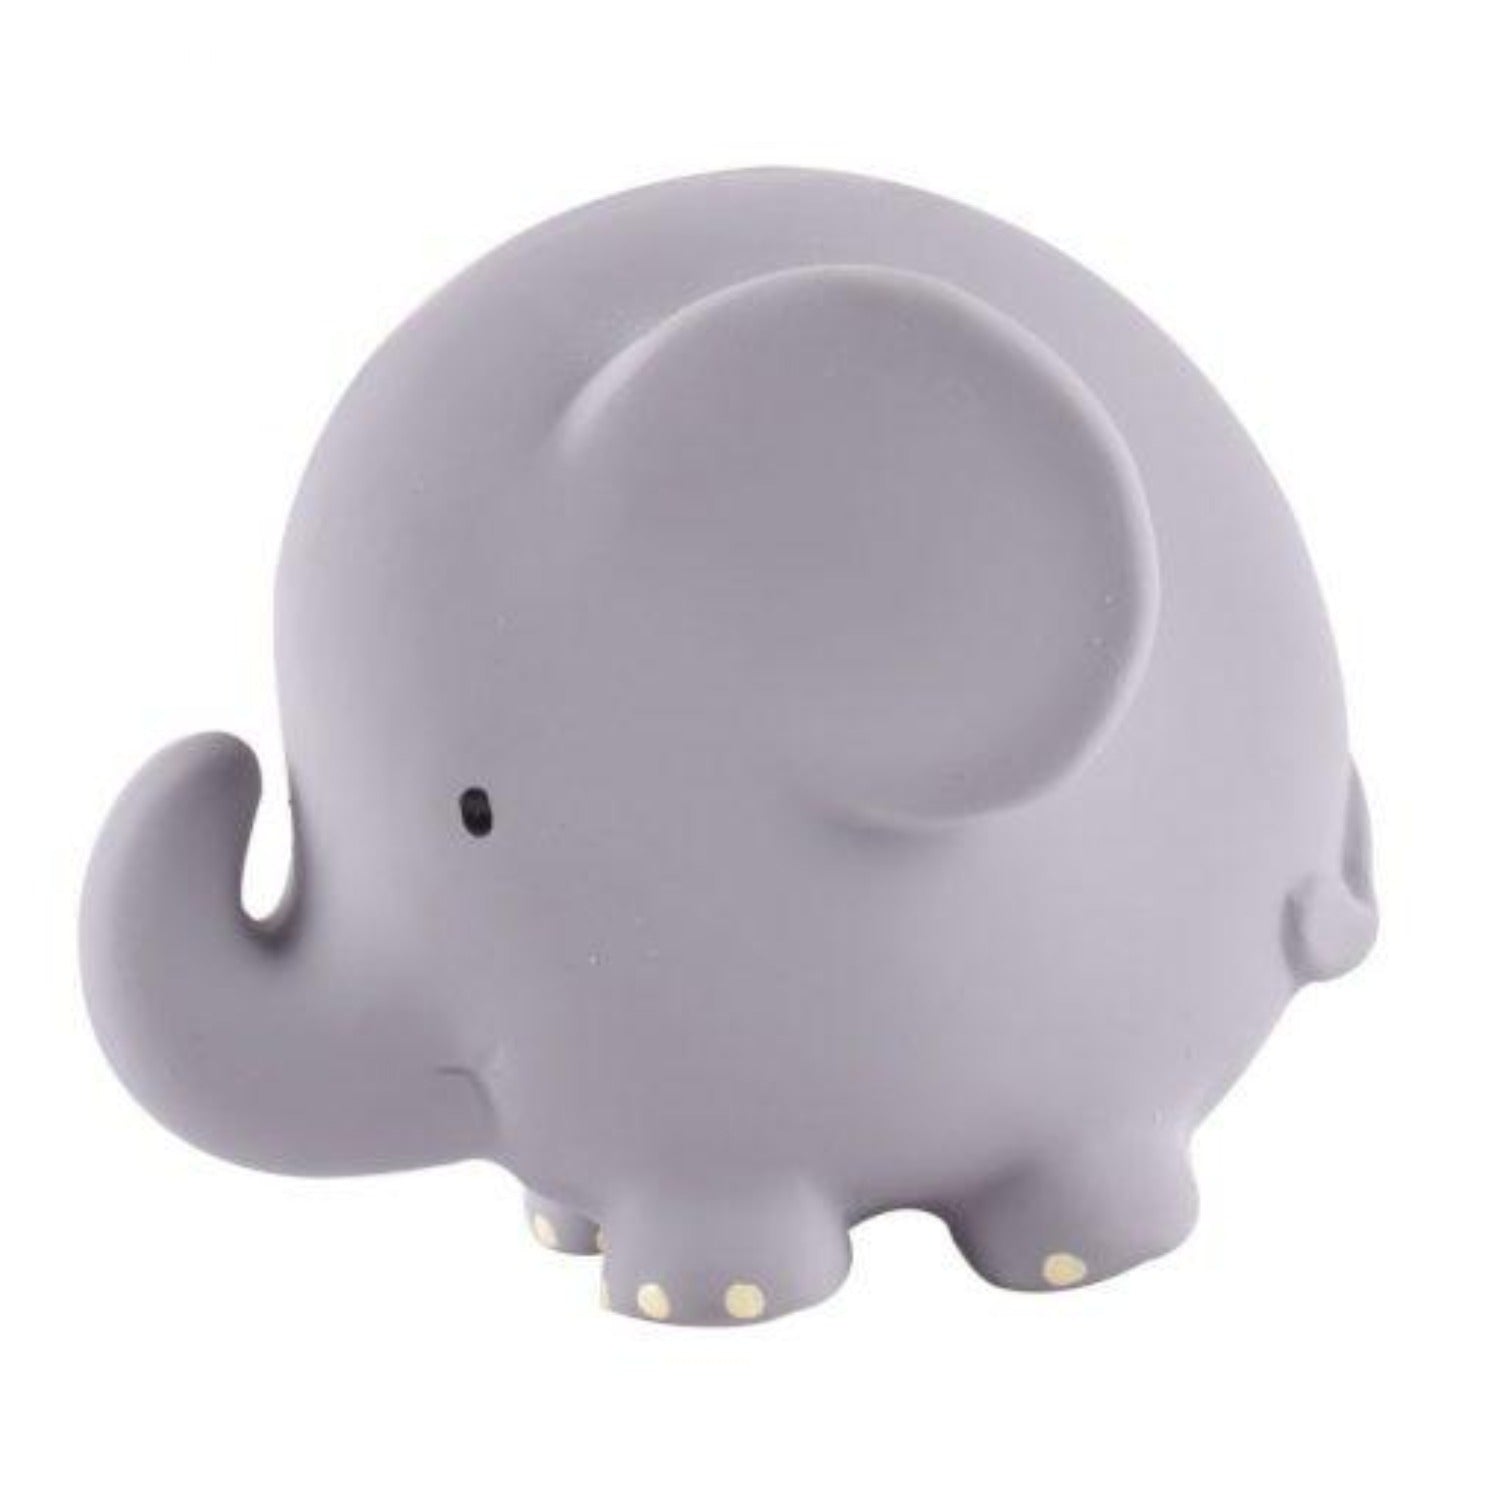 Elephant Natural Rubber Rattle and Bath Toy